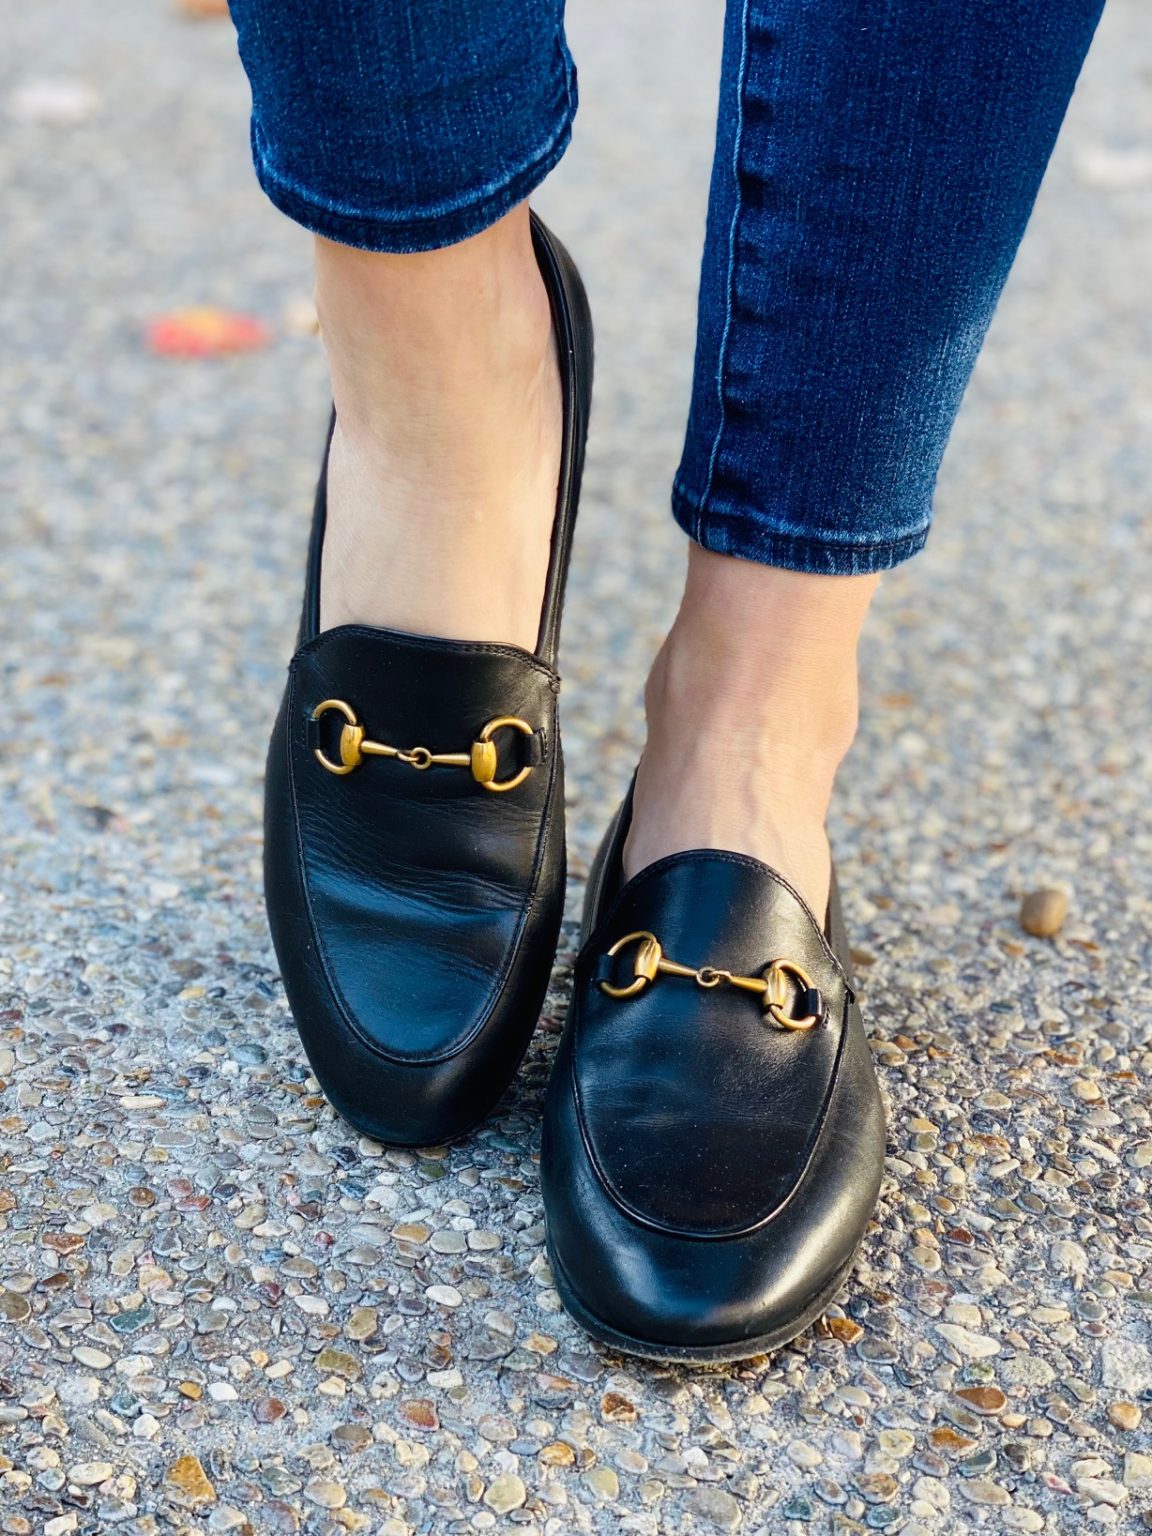 BEST GUCCI LOAFER DUPES - Classically Modern Life, Style & Home